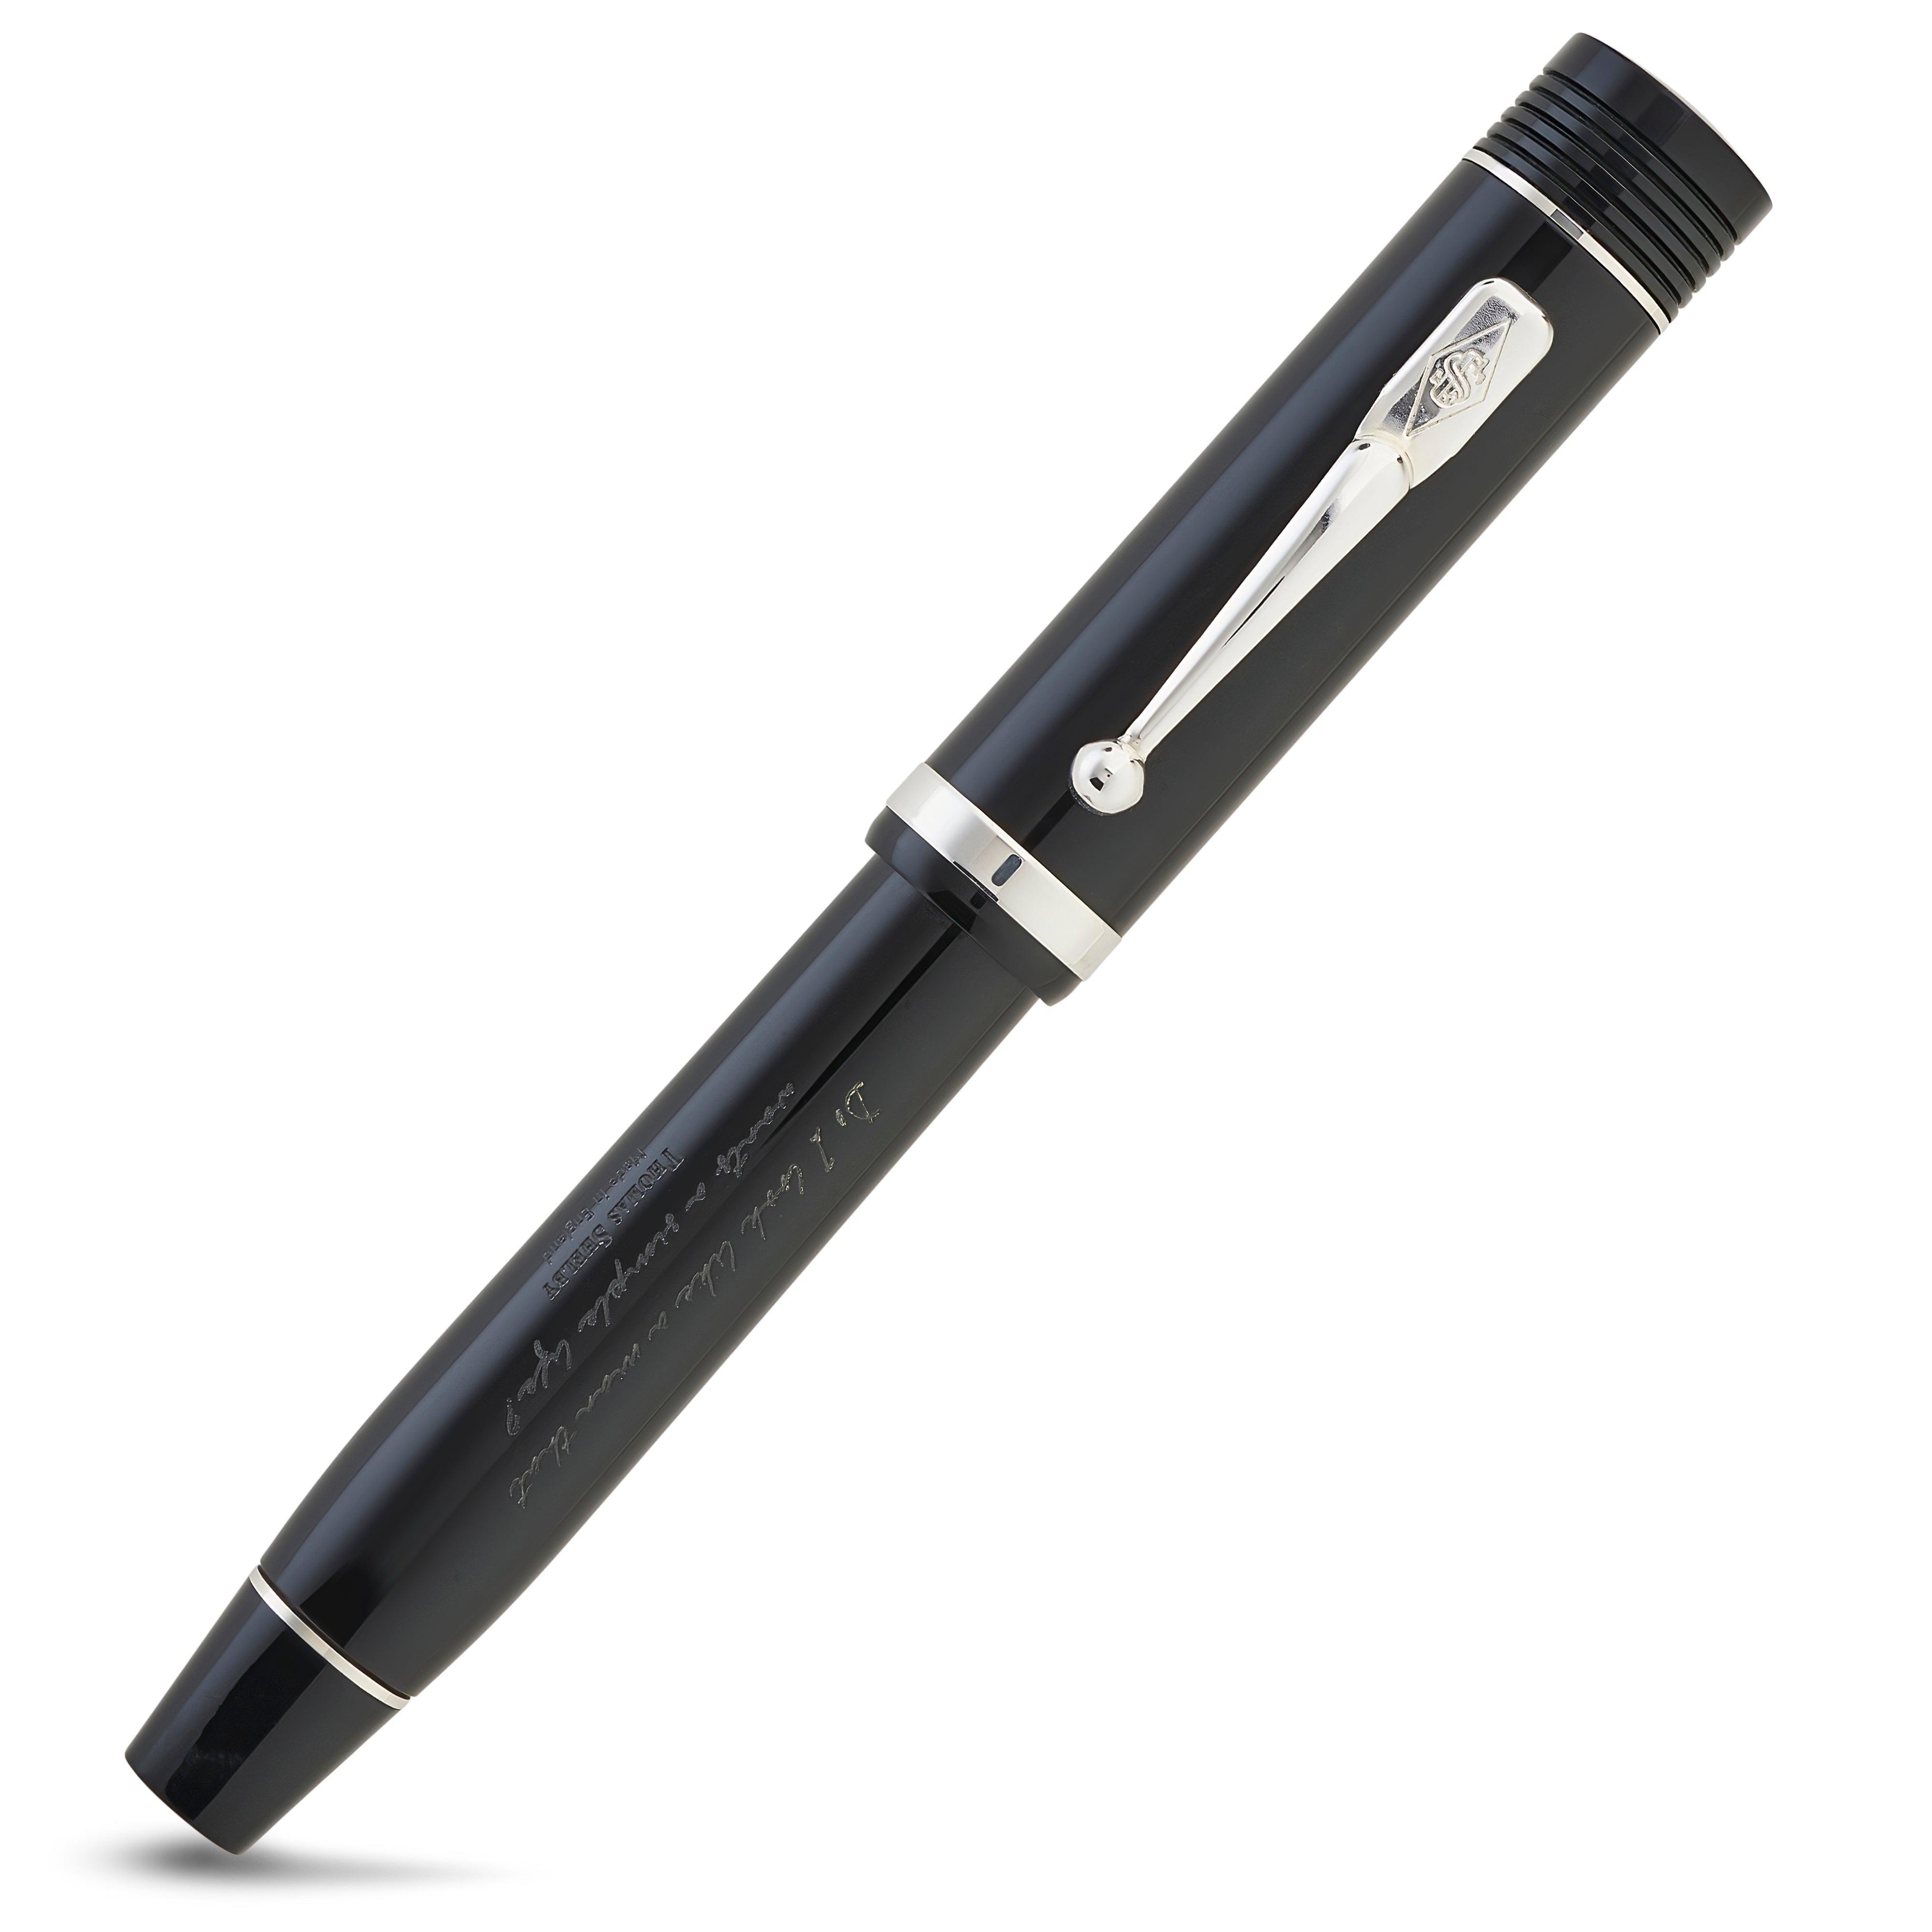 The Tommy Shelby Pen conwaystewart.com